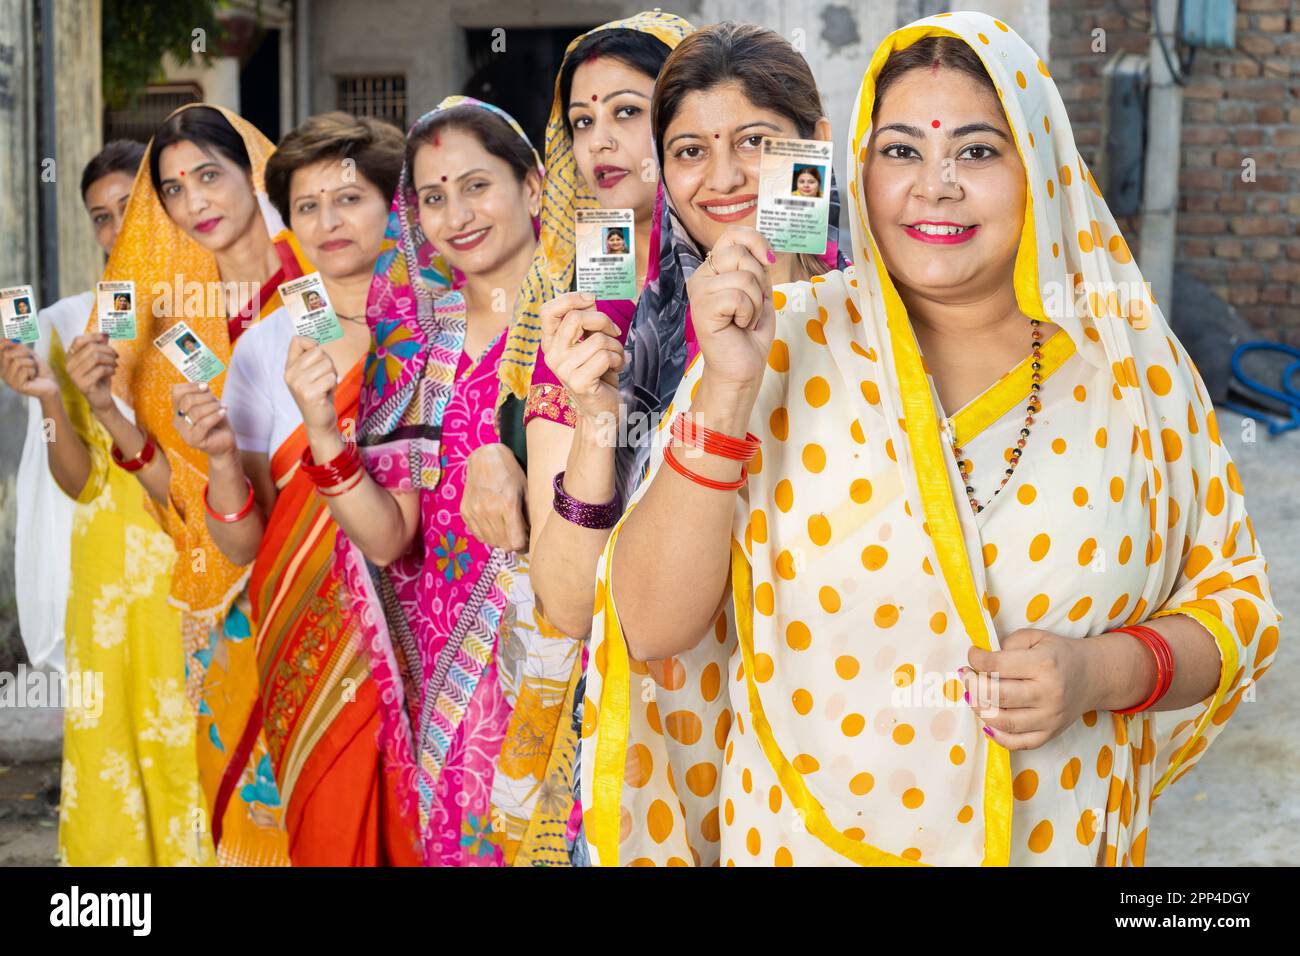 Group of happy traditional indian women standing in queue showing voter card id to cast vote at polling station. Election in india. Stock Photo